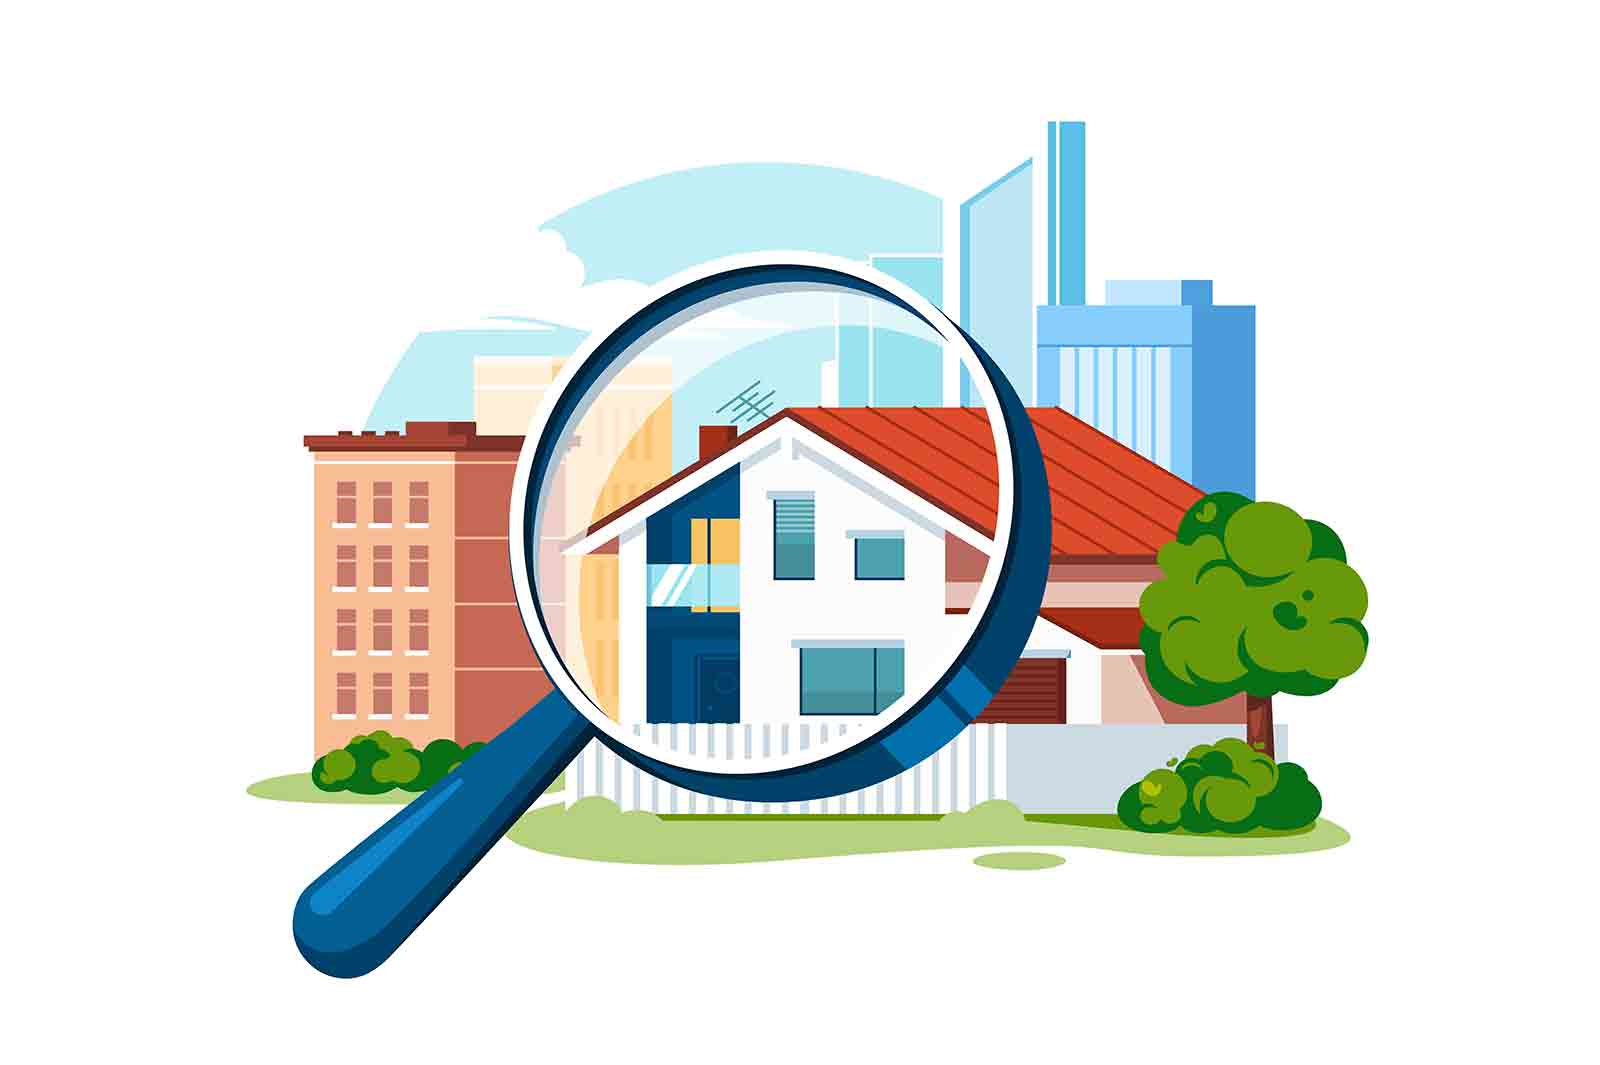 Search for real estate or place for living vector illustration. Available place for rent or sale flat style. Property, accommodation concept